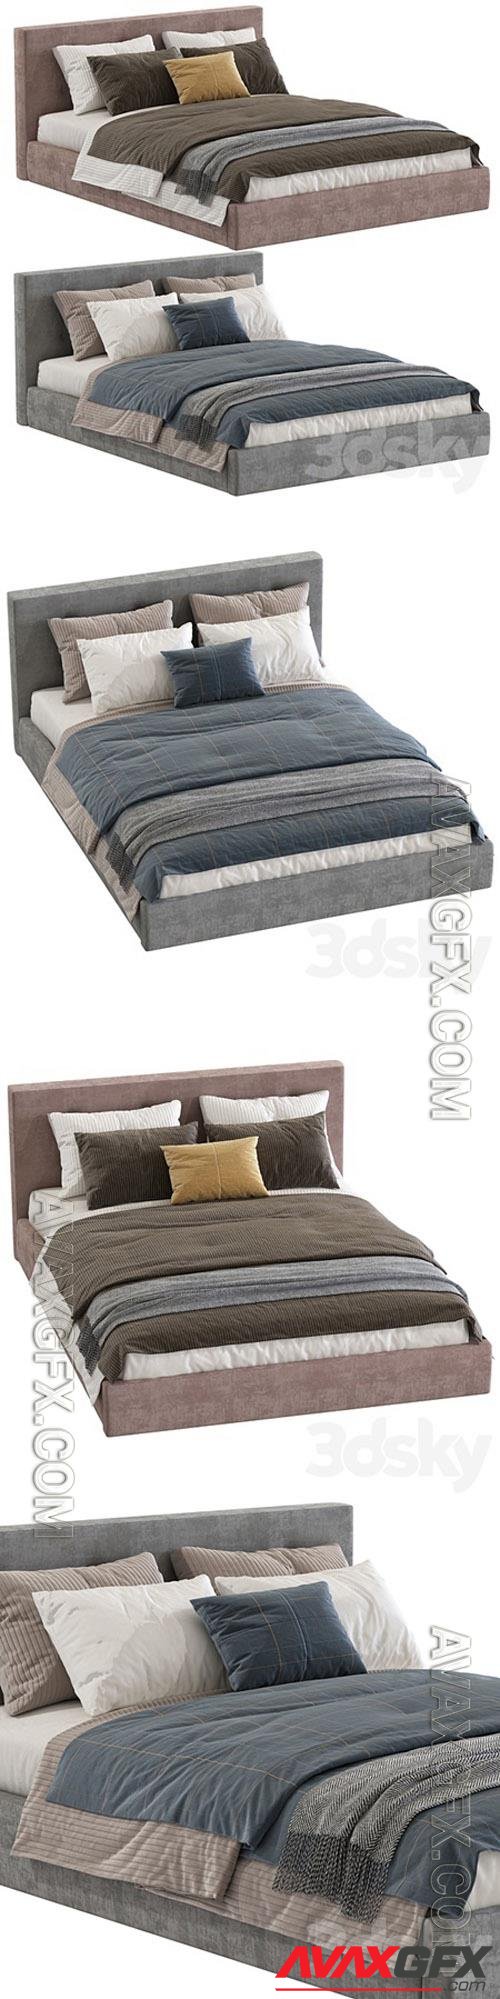 Bed Cushy Upholstered Platfrom Bed 3D Models